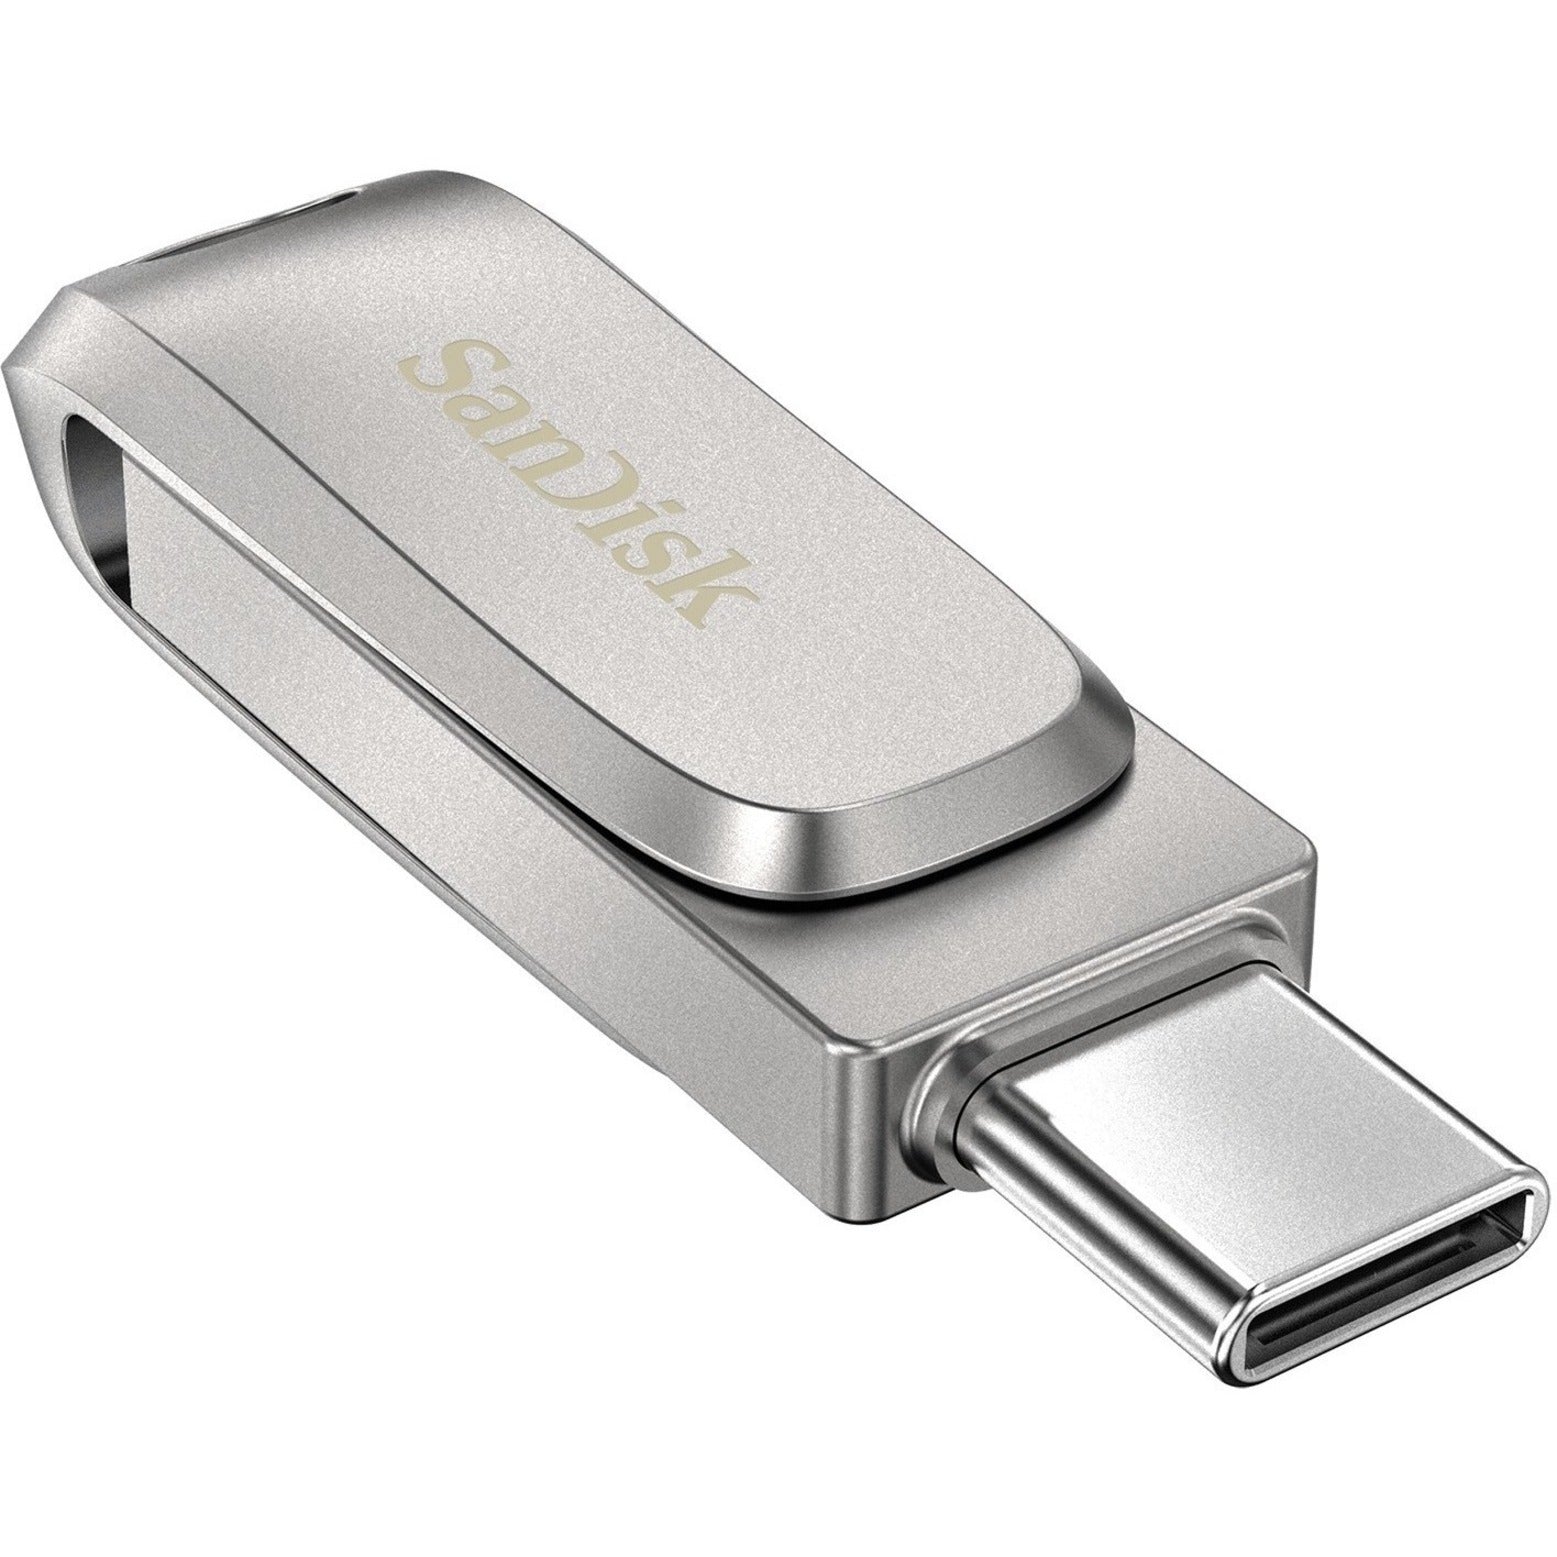 SanDisk SDDDC4-1T00-A46 Ultra Dual Drive Luxe USB TYPE-C - 1TB, High-Speed Data Transfer and Storage Solution